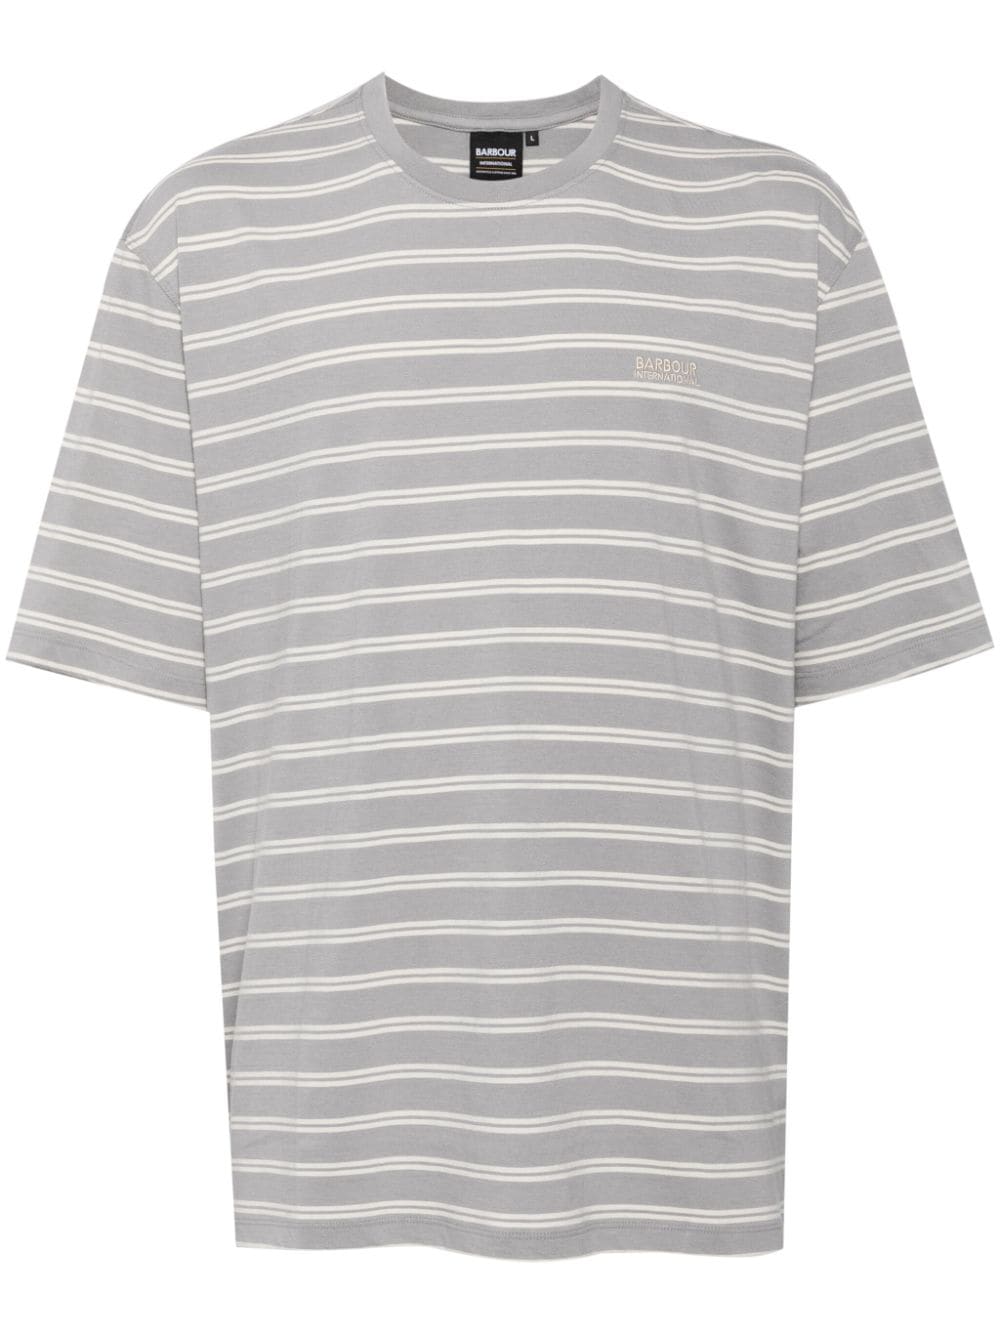 Barbour Striped Cotton T-shirt In Grey